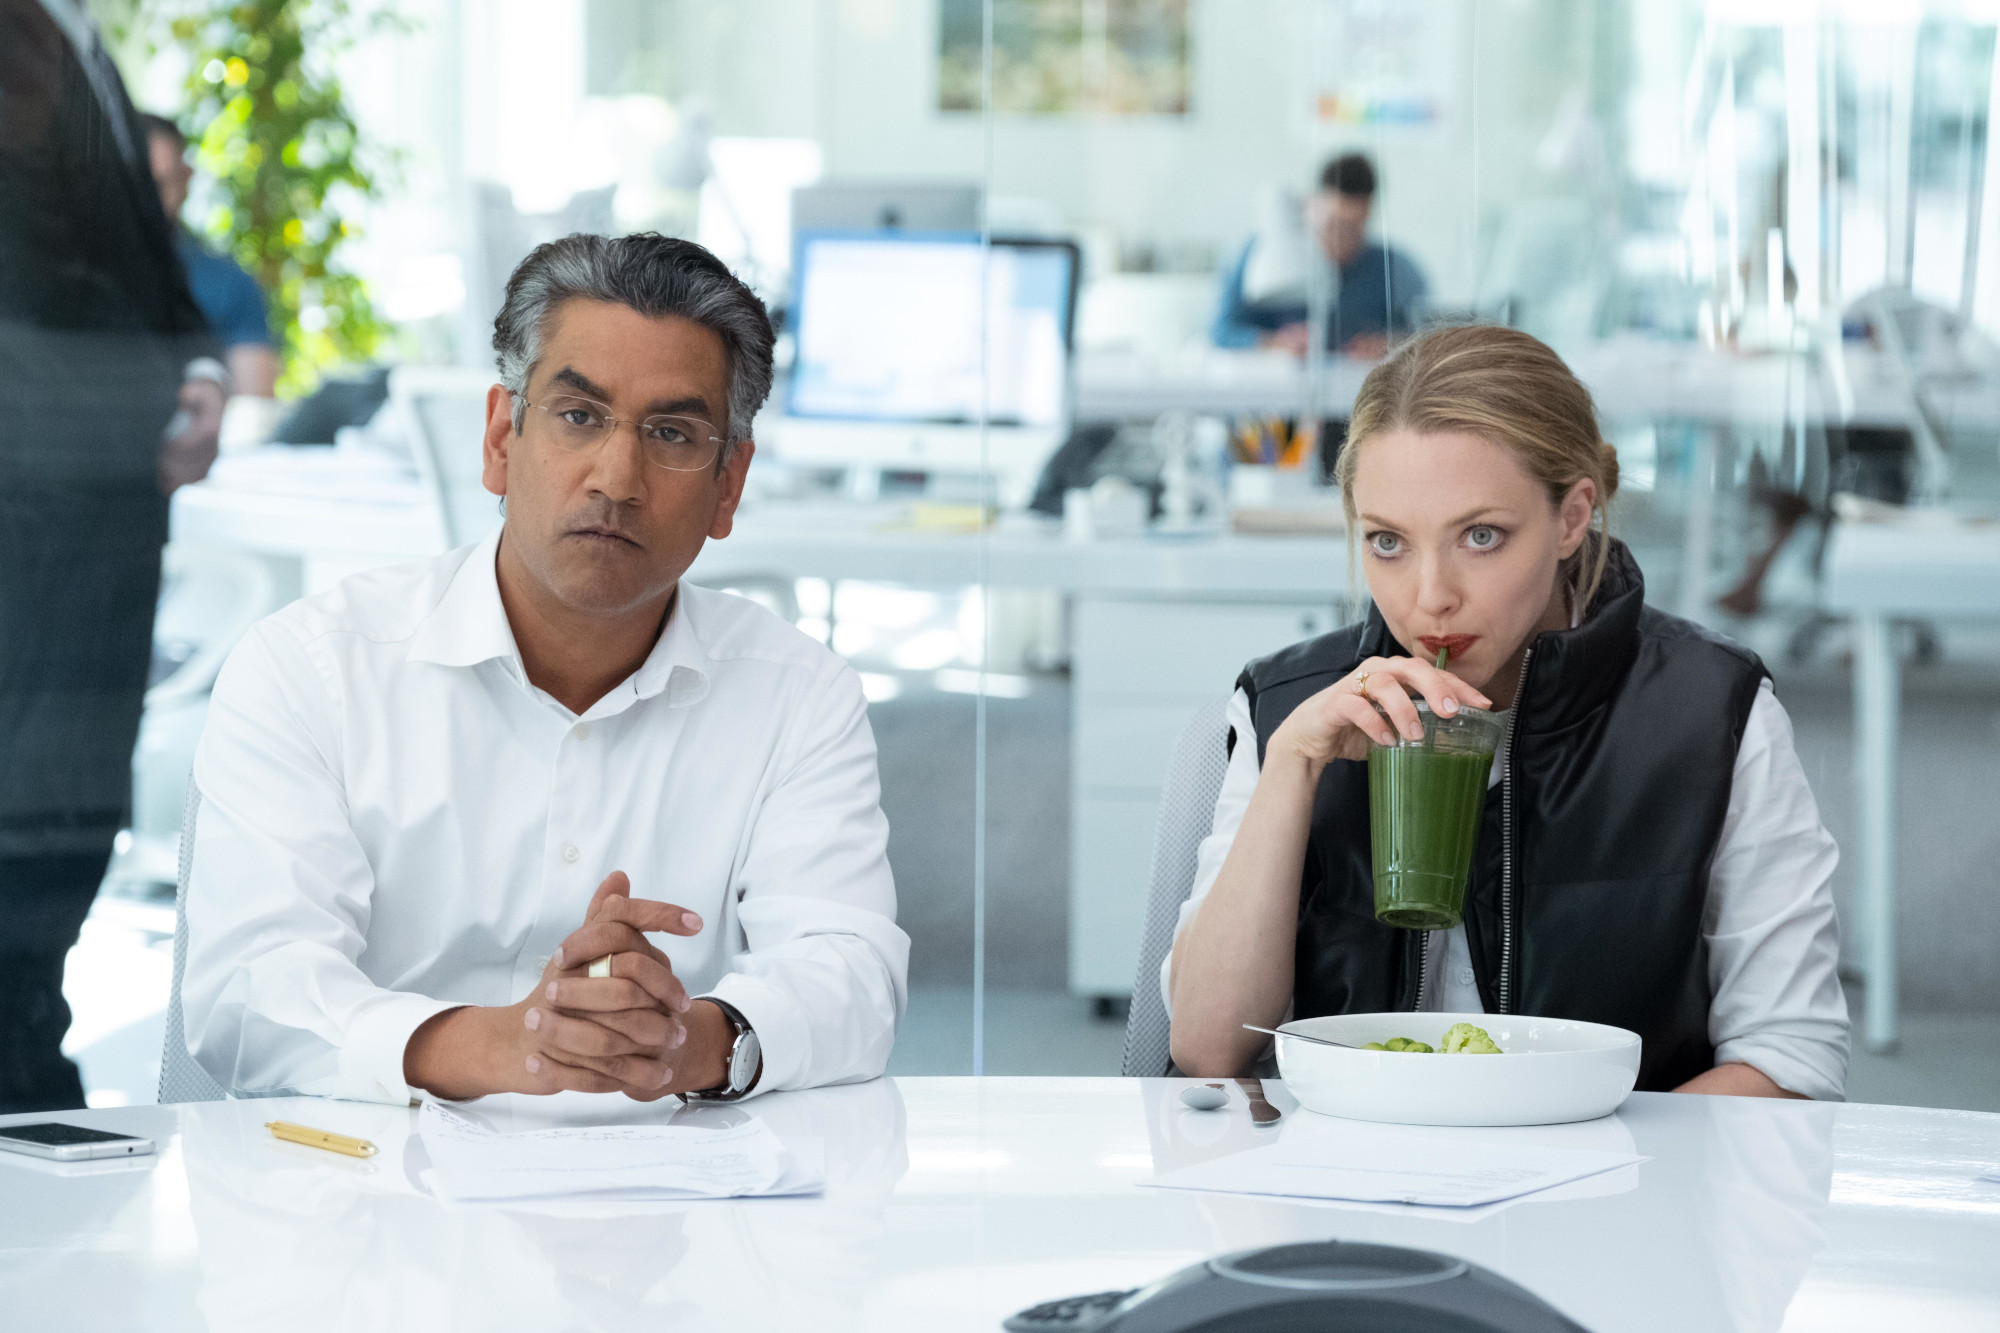 Naveen Andrews and Amanda Seyfried as Sunny Balwani and Elizabeth Holmes in 'The Dropout' Episode 7. They're sitting at a white table, and Seyfried's character is drinking green juice.